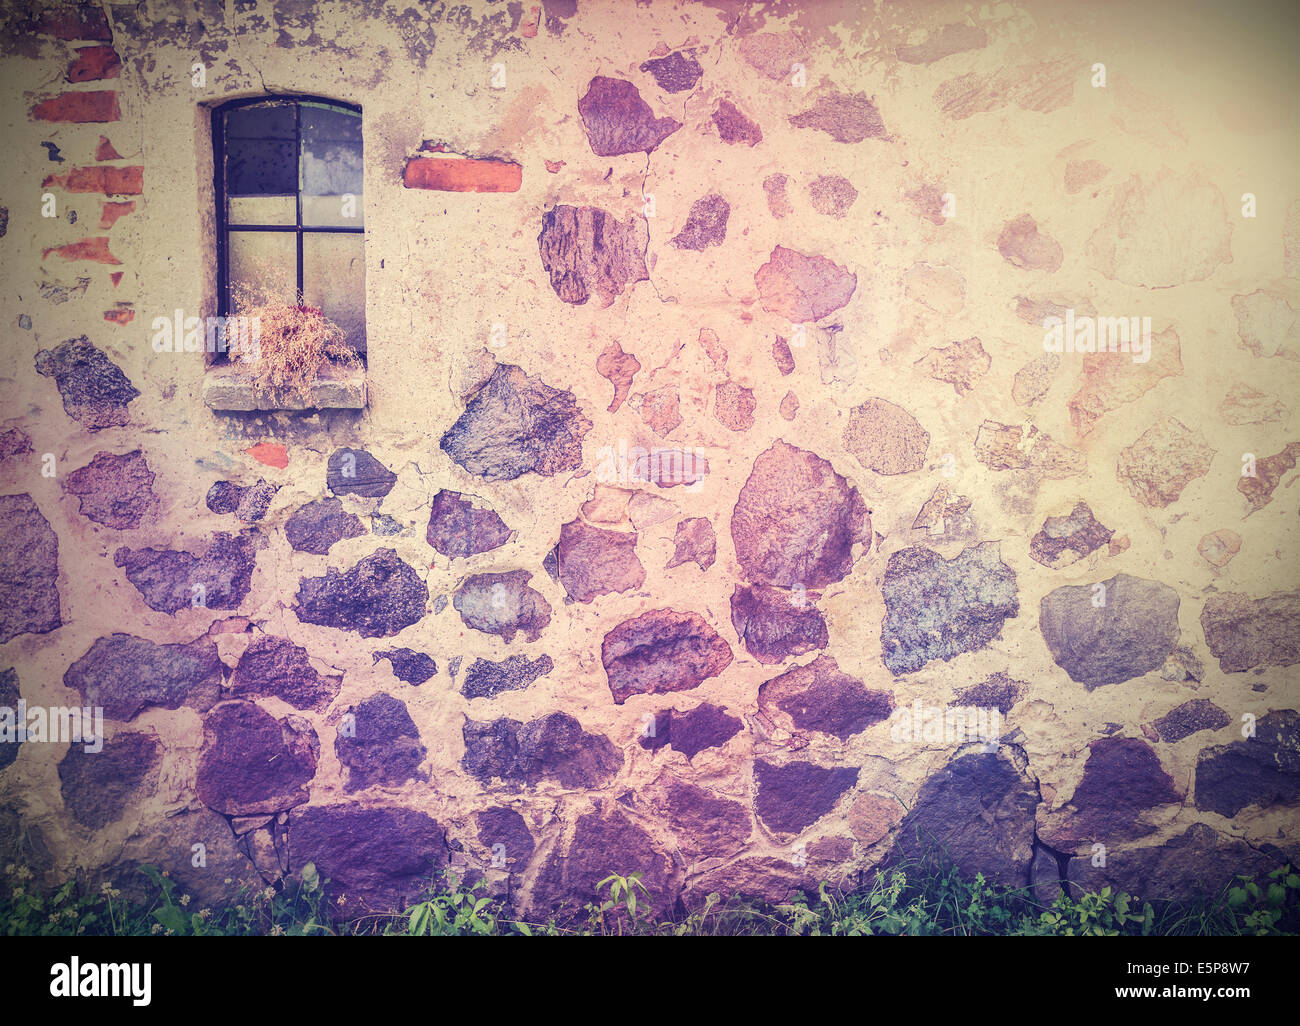 Vintage retro picture of stone wall with window. Stock Photo